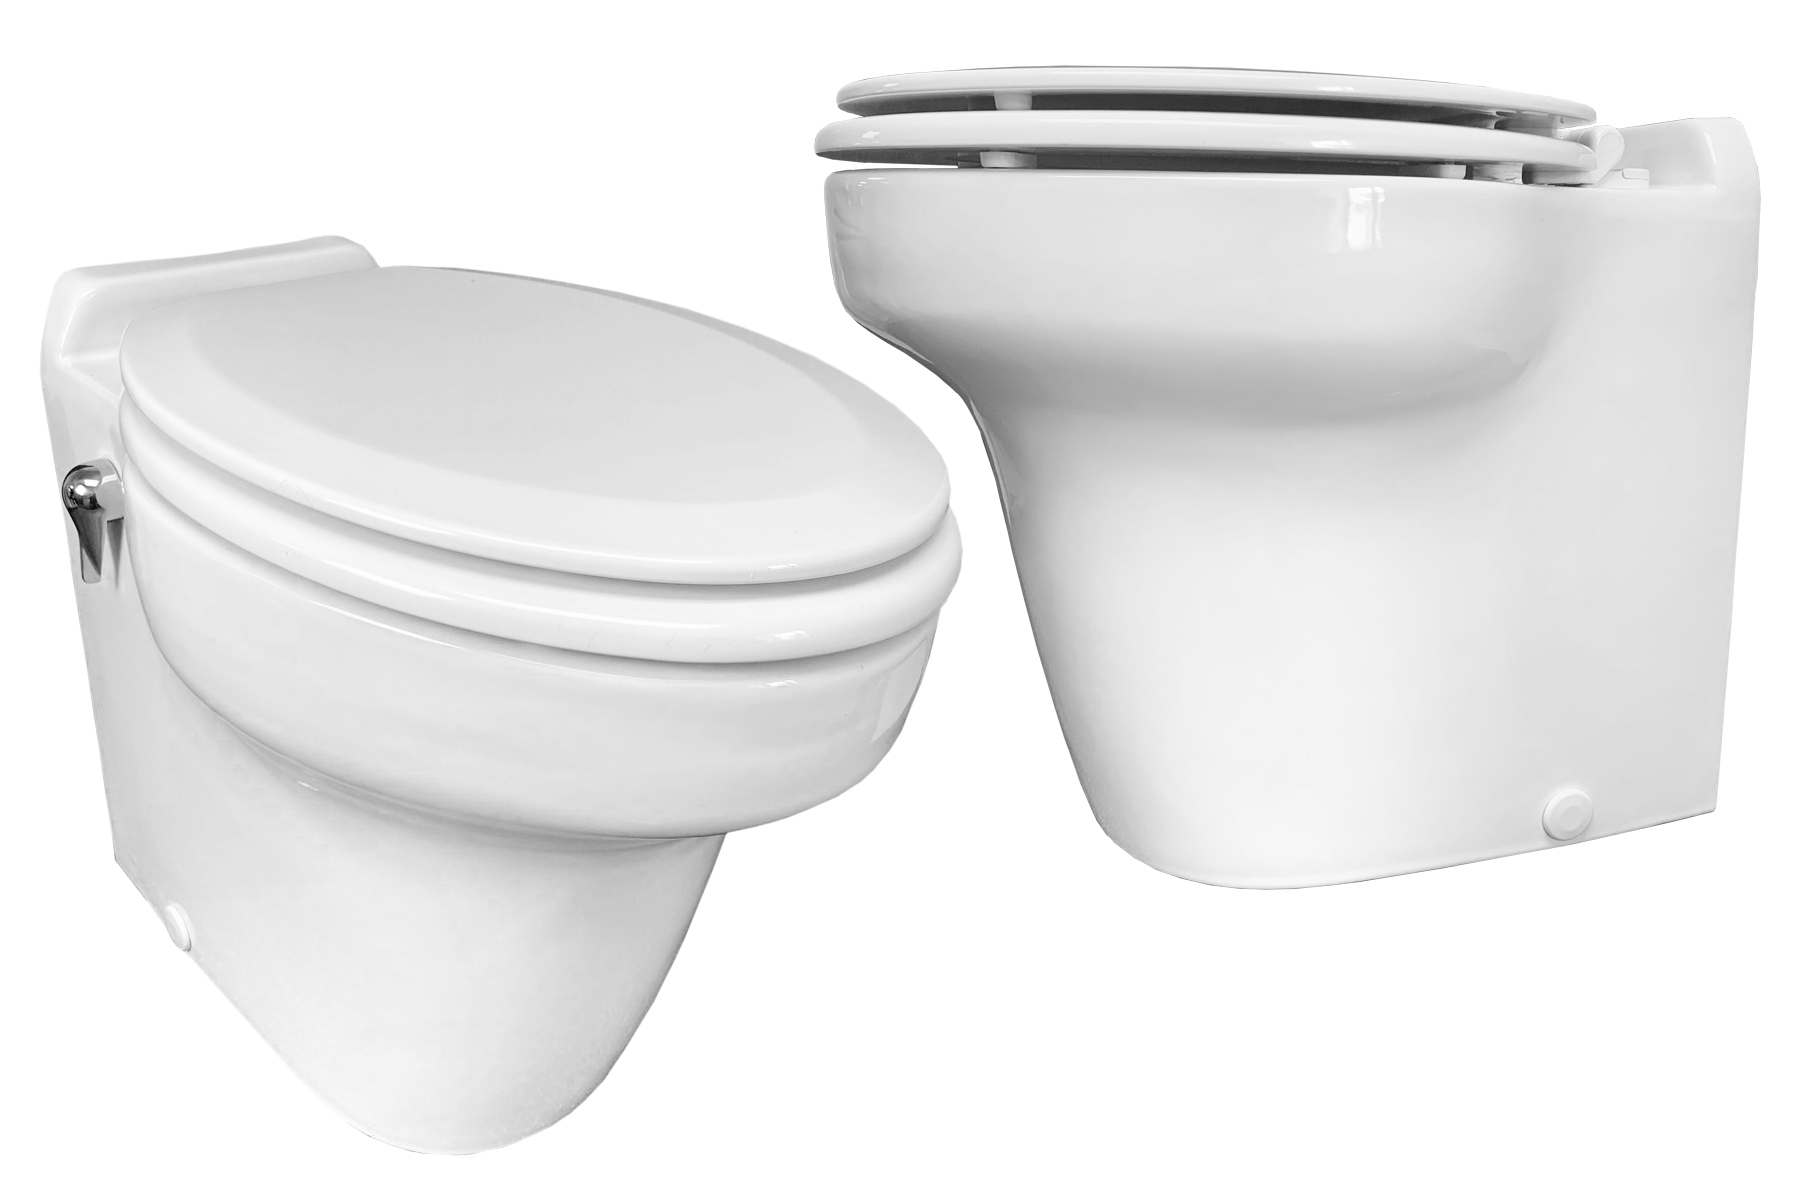 Product shot for the Marine Elegance electric toilet